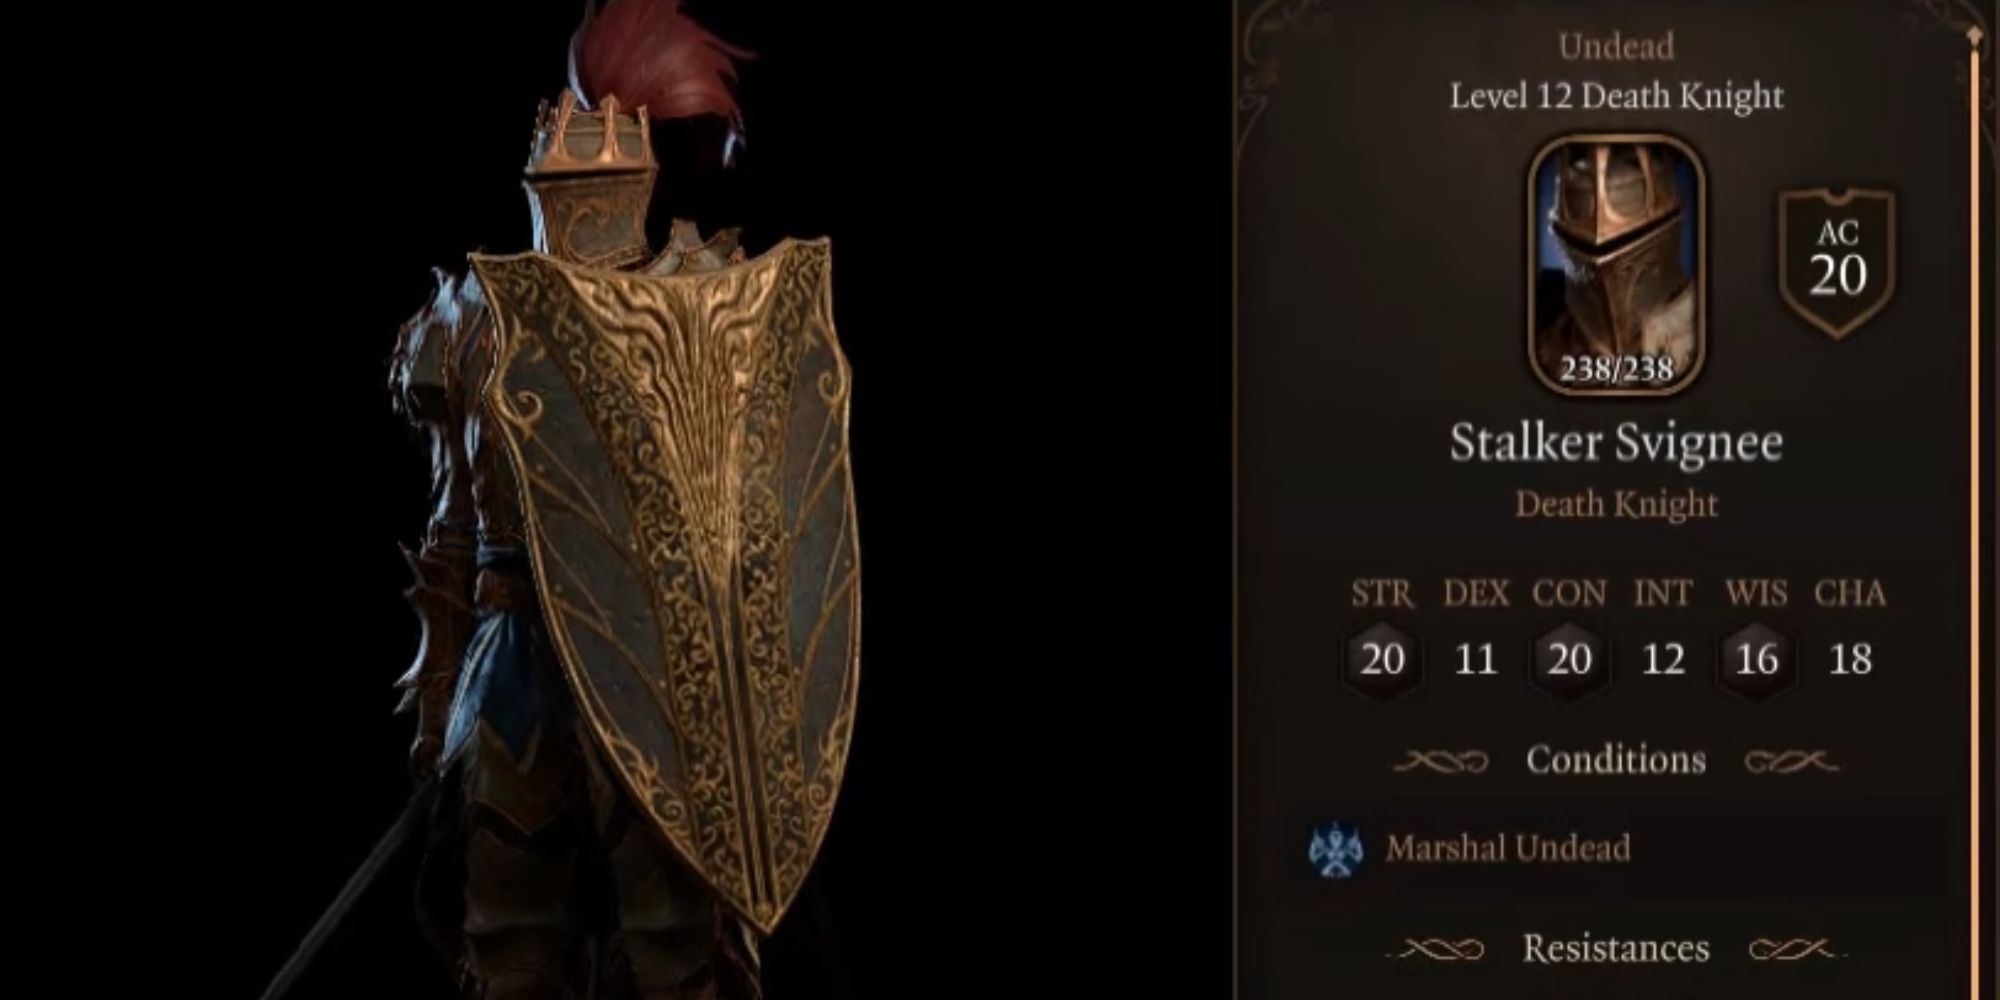 Baldur's Gate 3, In Game Stats And Image Of A Death Knight, Stalker Svignee